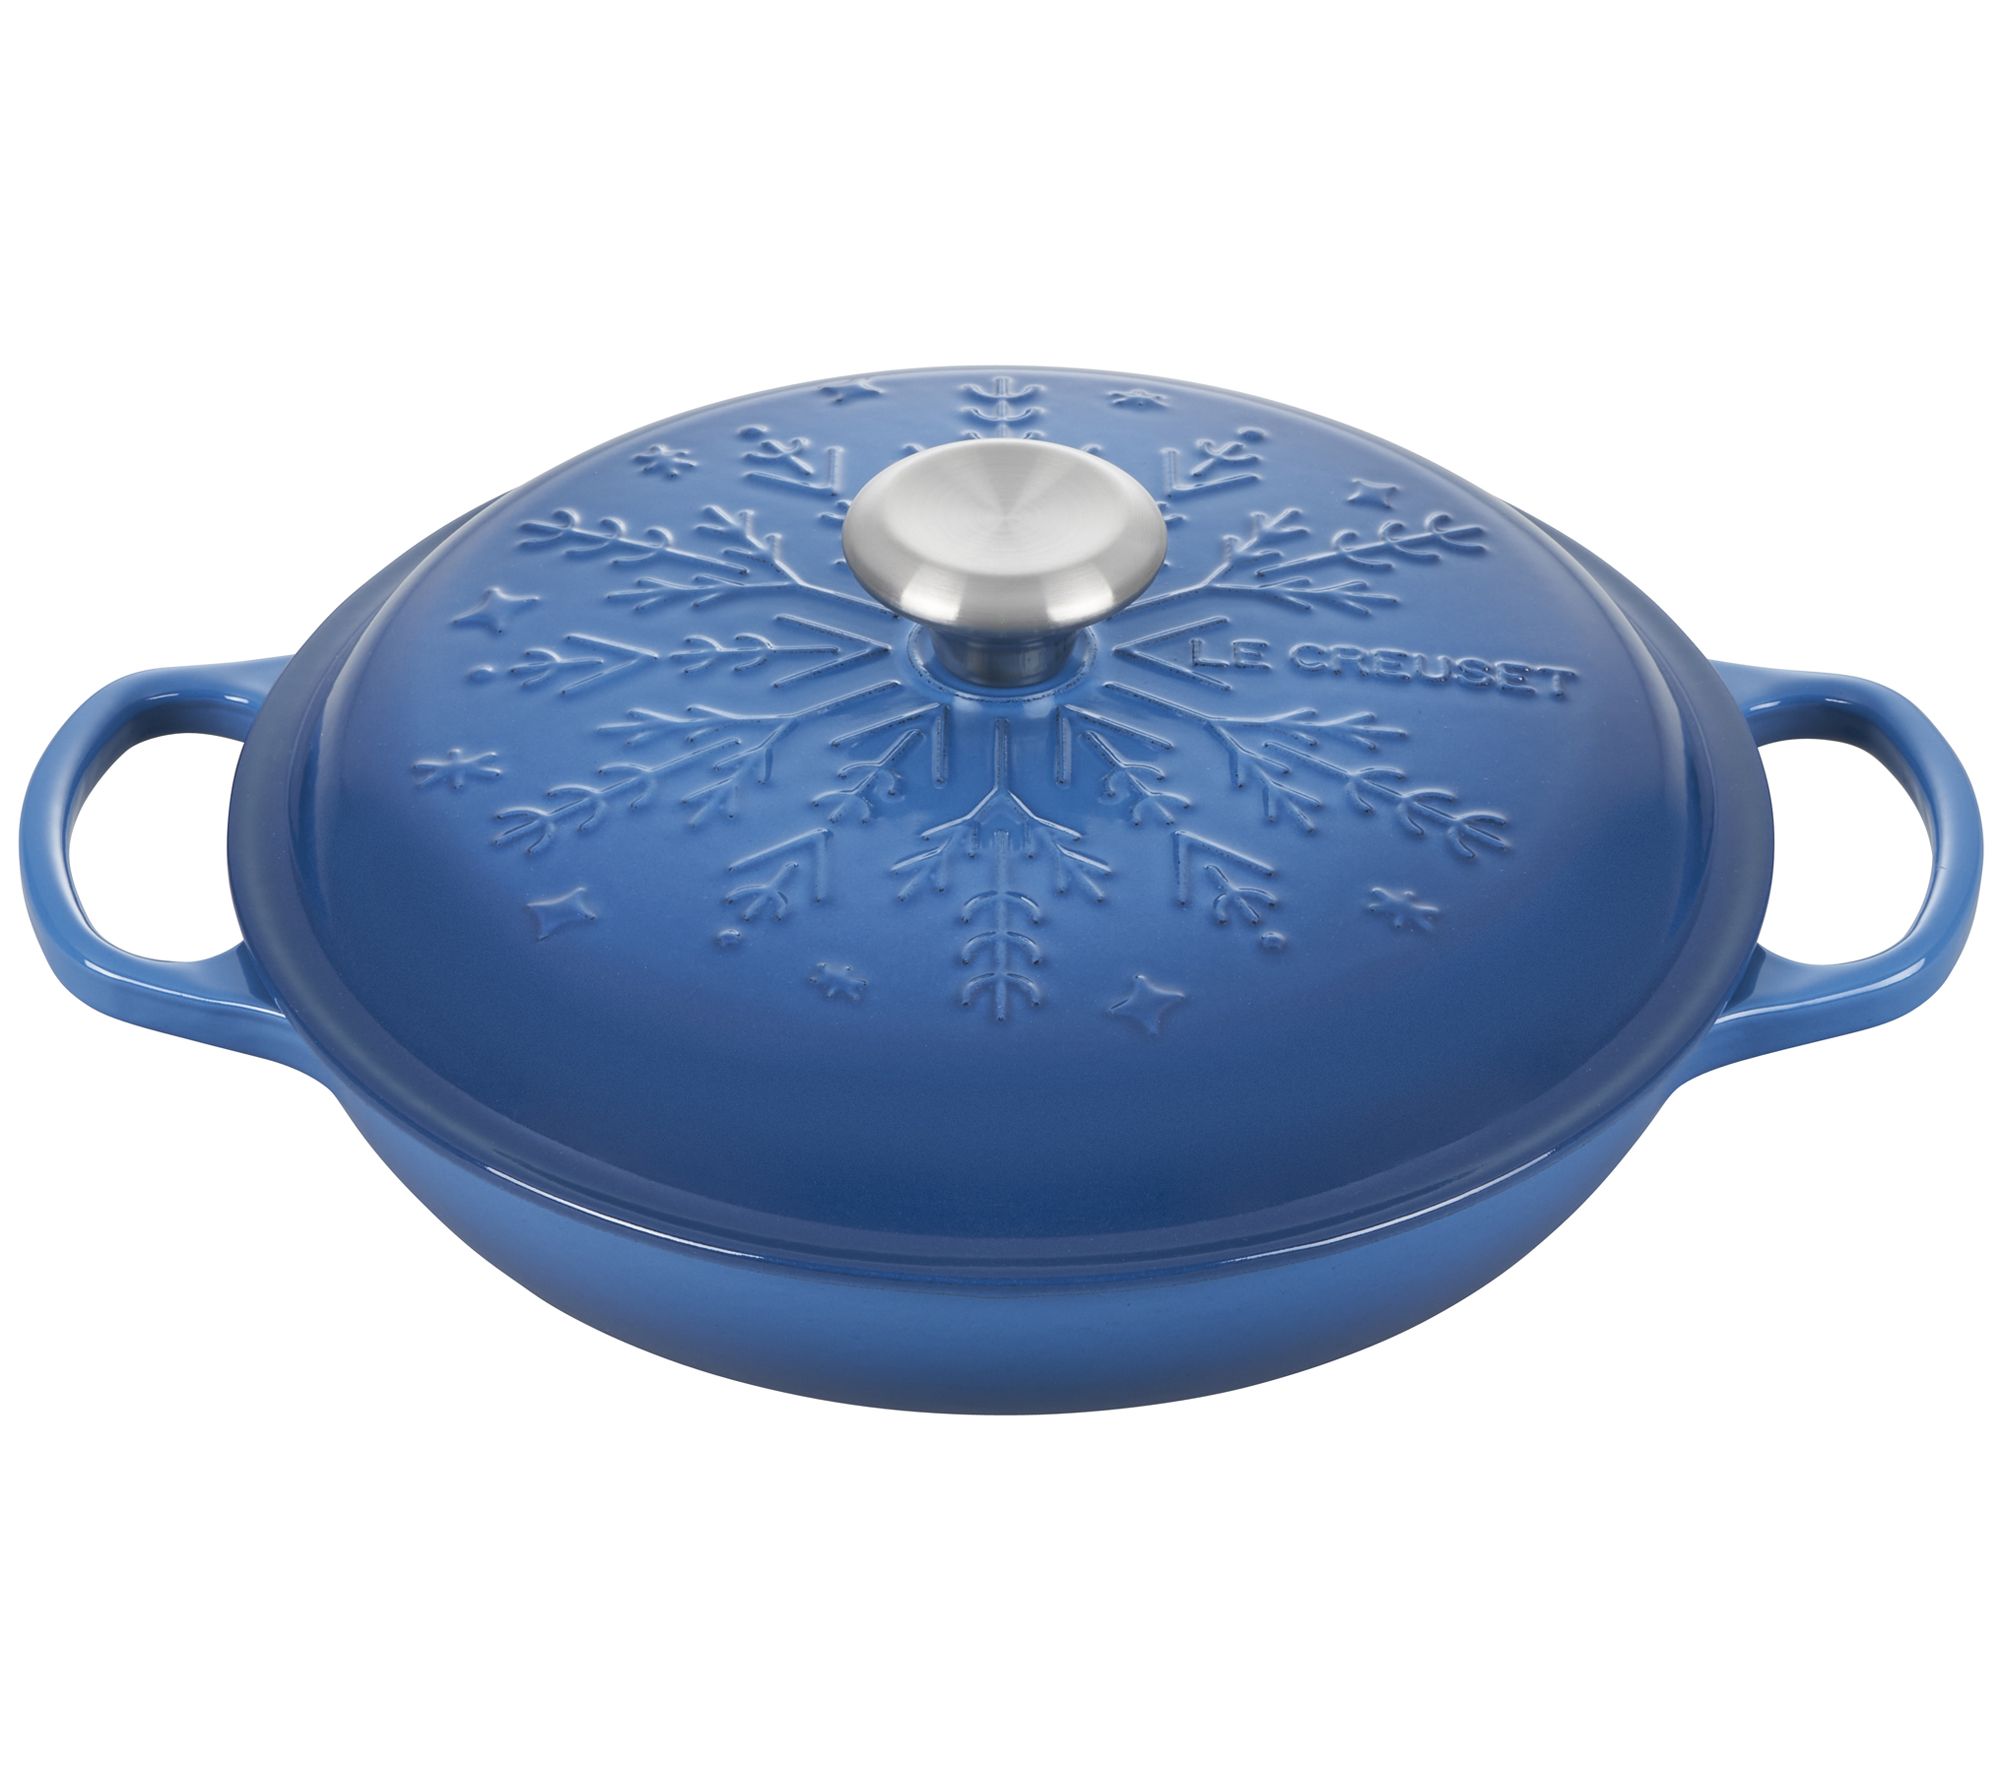 11 Crepe Pan with Rateau (Toughened Nonstick Pro), Le Creuset